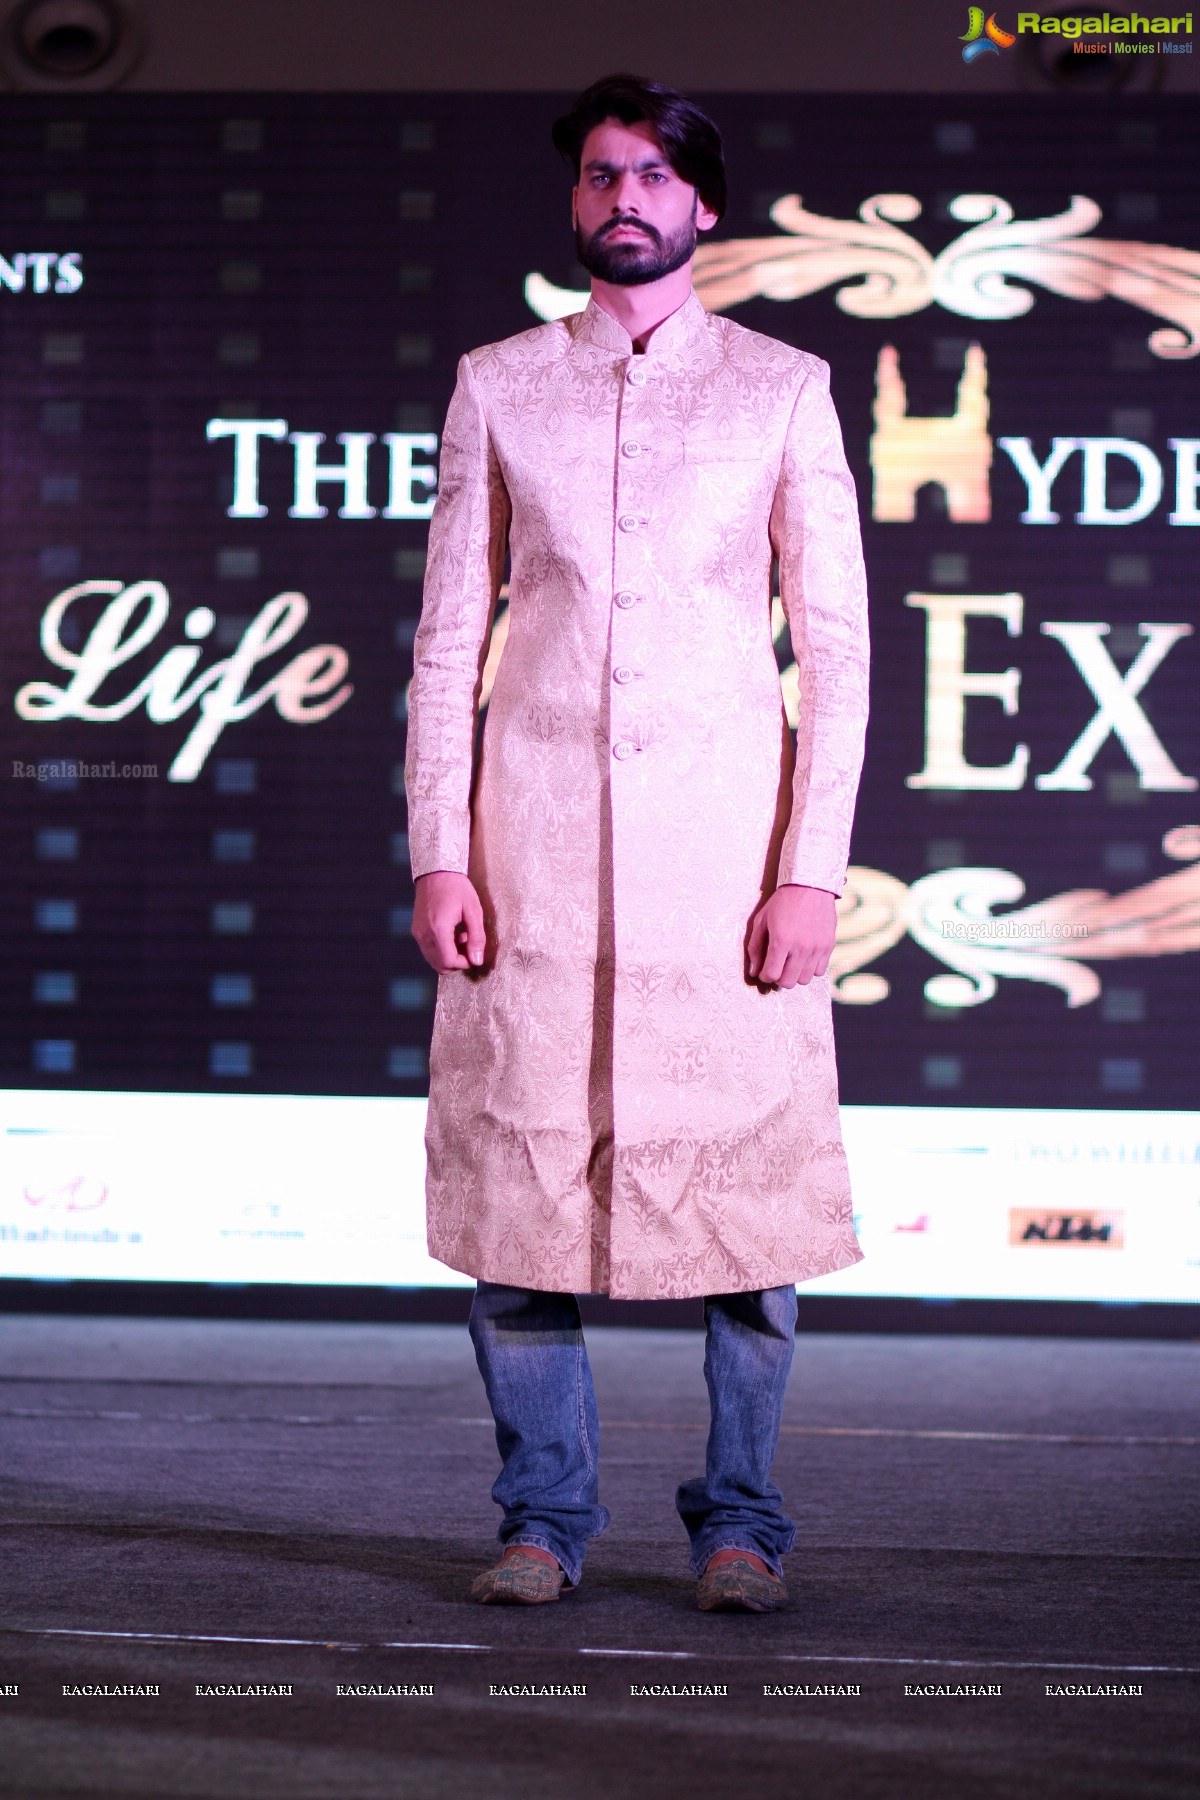 V Star Entertainment and SIPL Lifestyle Expo 2016 Fashion Show at Forum Sujana Mall, Hyderabad